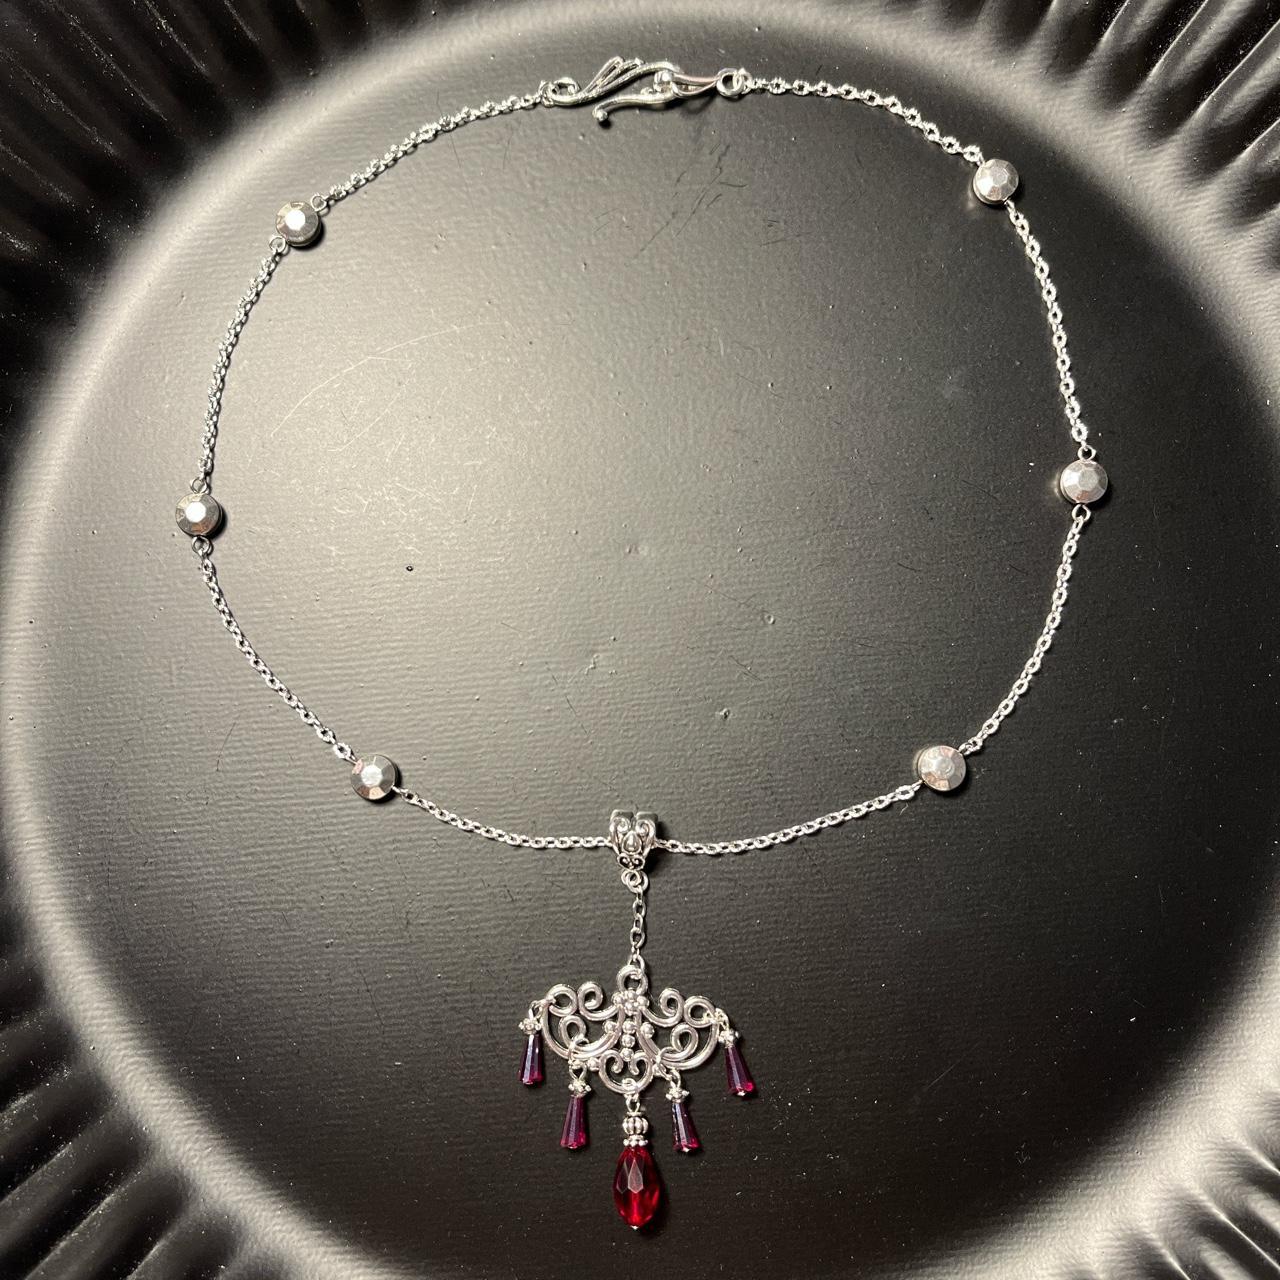 Product Image 3 - A chandelier necklace✨ It’s a